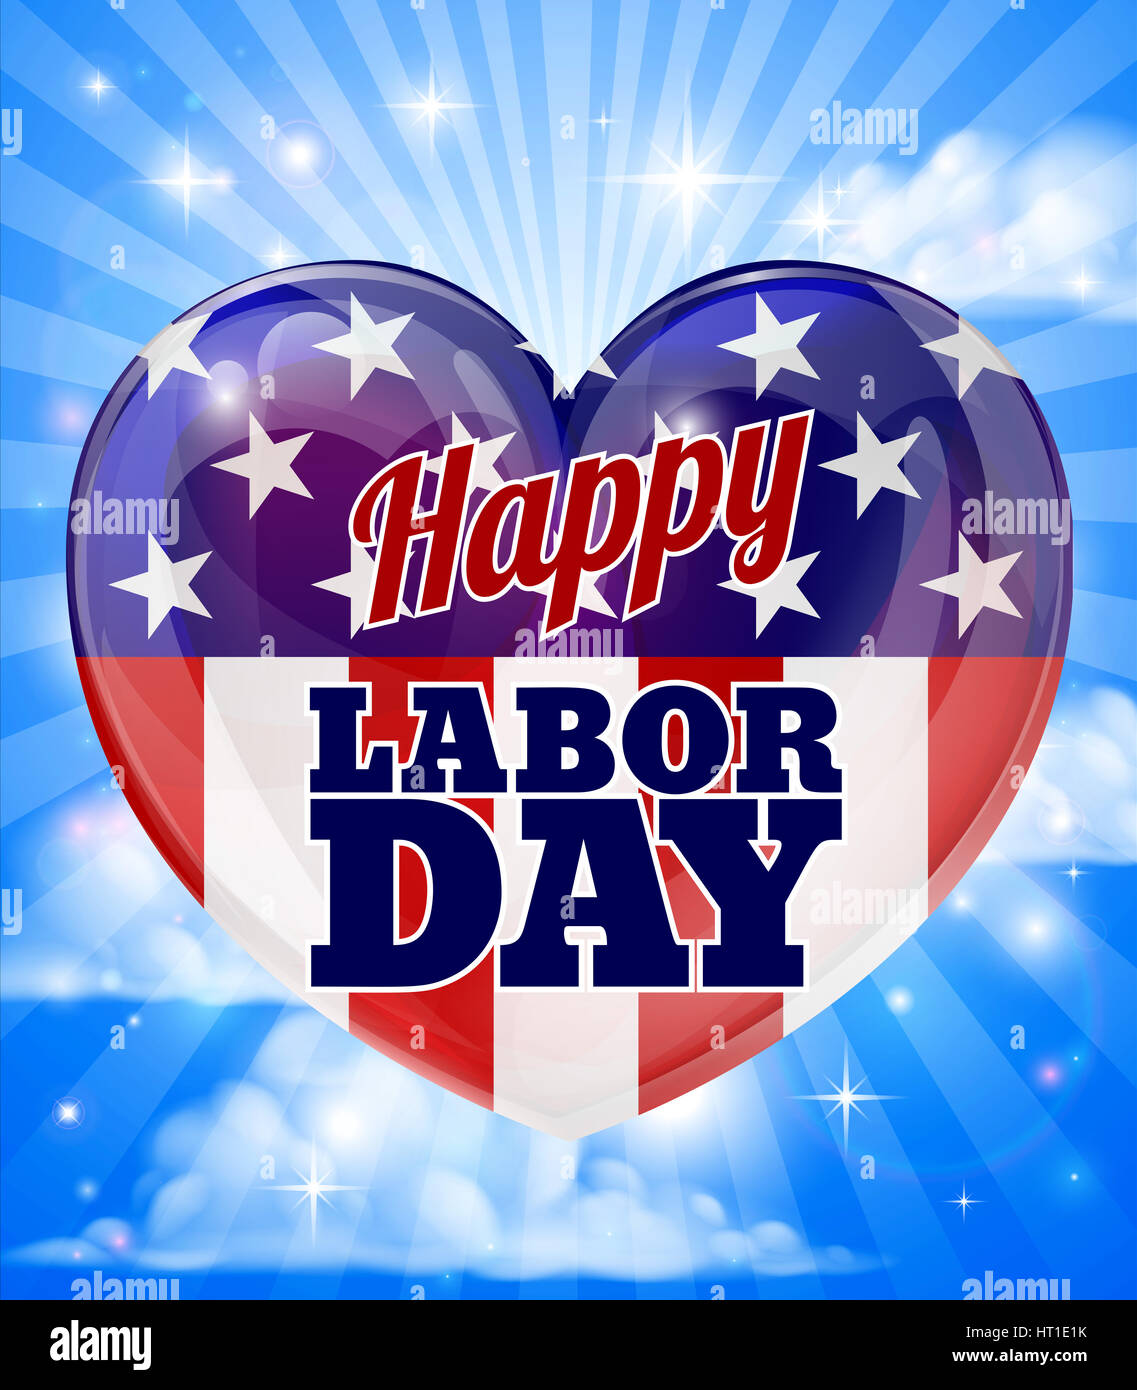 A Happy Labor Day background design with an American flag heart shape Stock Photo